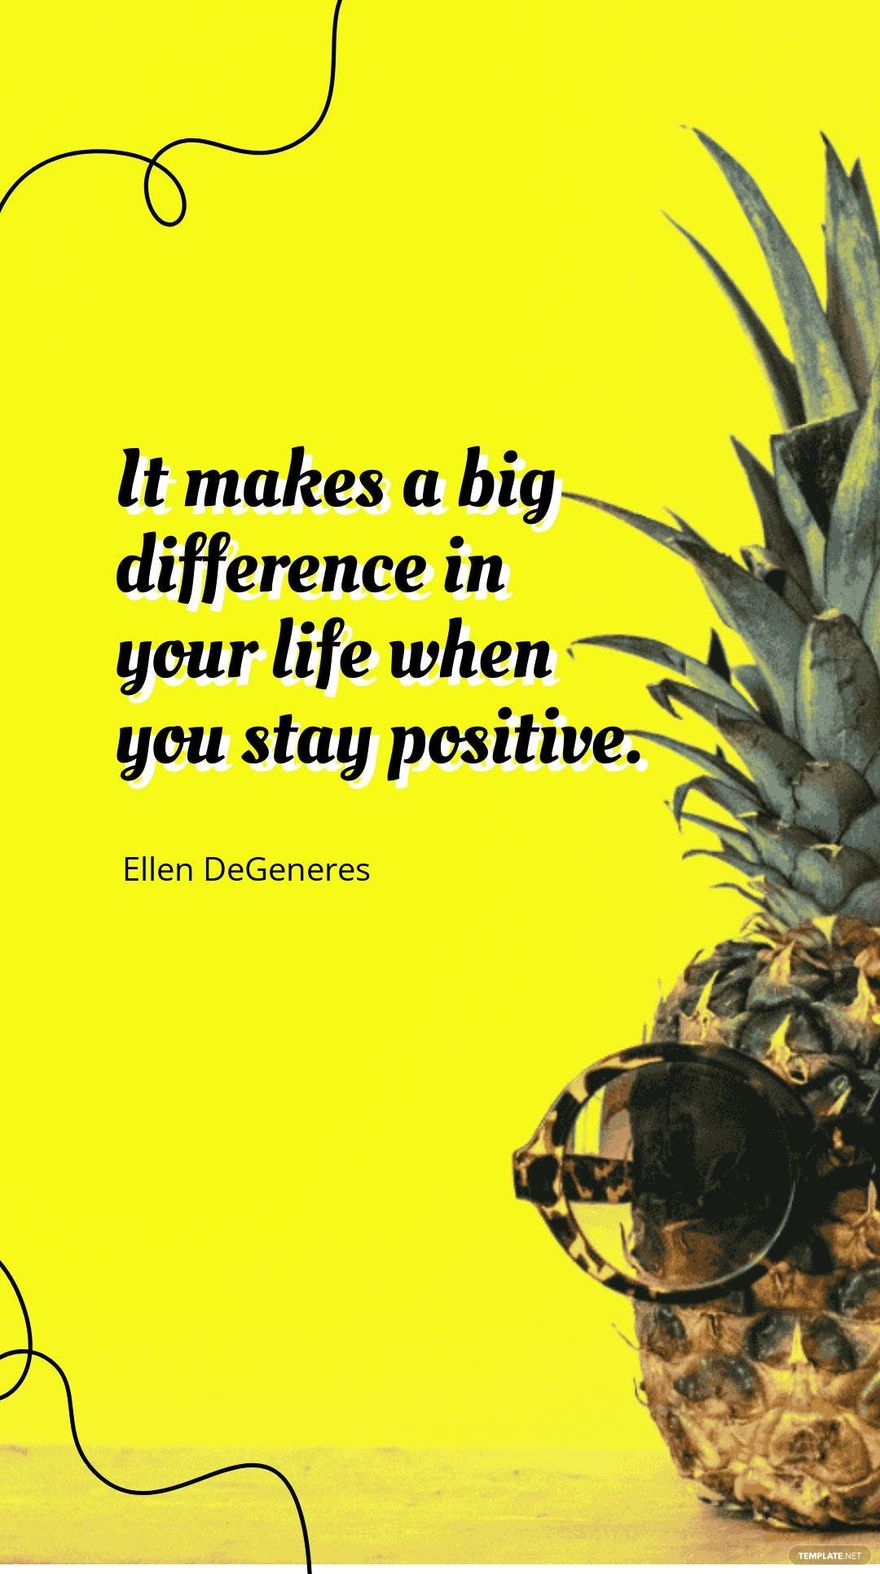 Ellen DeGeneres - It makes a big difference in your life when you stay positive.